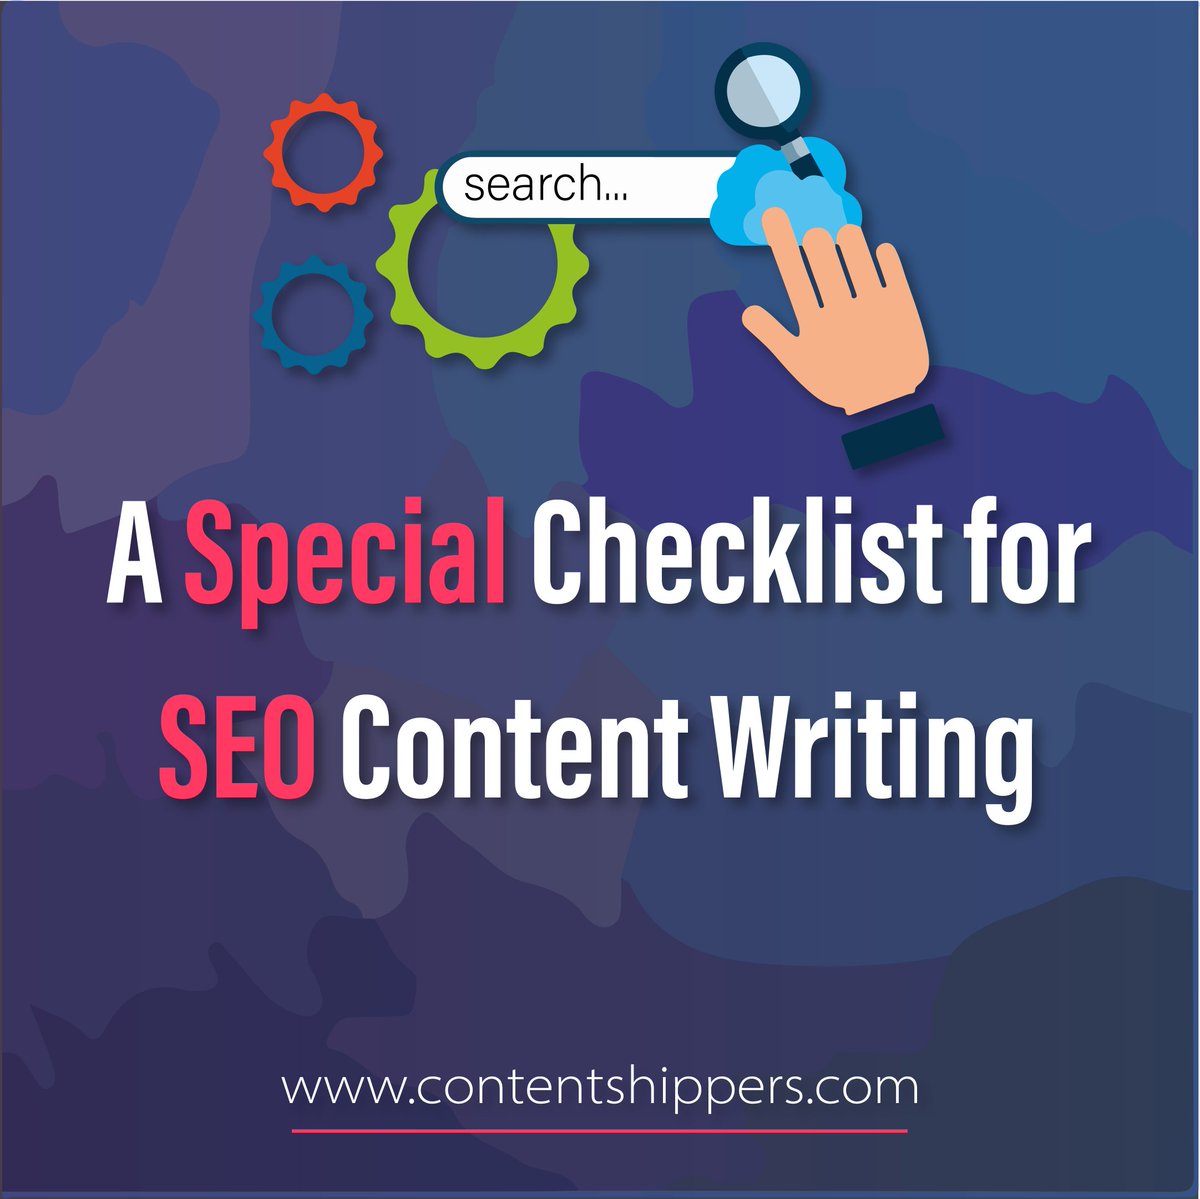 Are You Well Aware of SEO Optimized Content?
Not Yet? Then, Go Through These Tips.
CheckOut What Can Work Best For Your Brand! 😎✍️

#ContentShippers #ContentCreators #SEOContentWriting #ContentWriting #ContentMarketing #DigitalMarketing